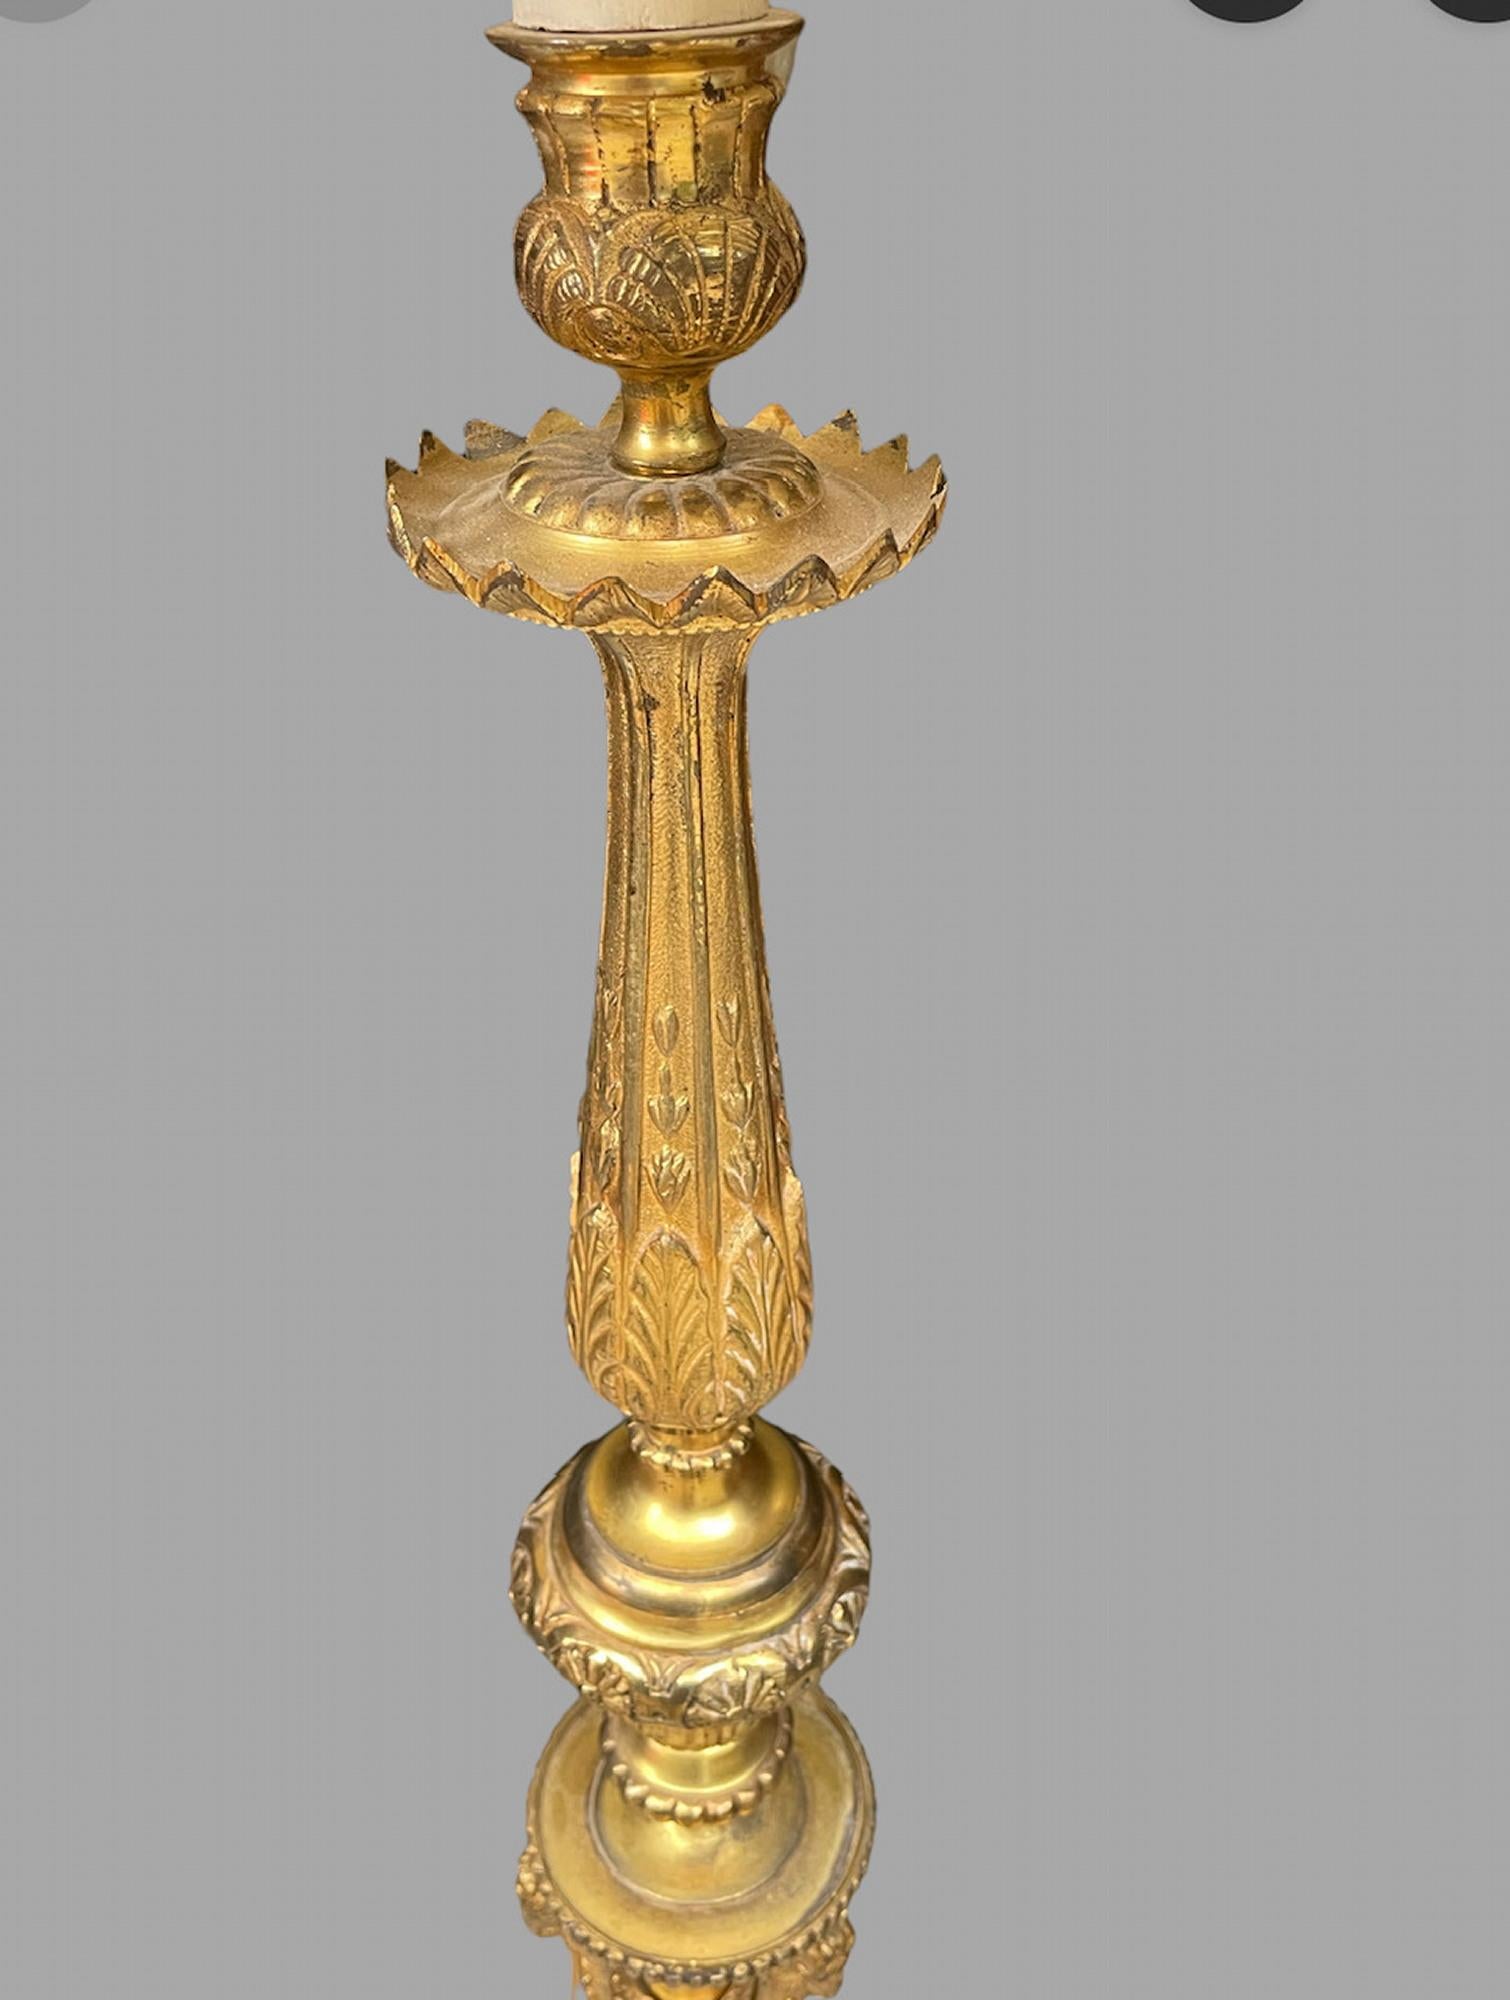 A French Brass 19th Century Standing lamp with shade with ram heads decoration and further decoration throughout brass. A beautiful standard Lamp.